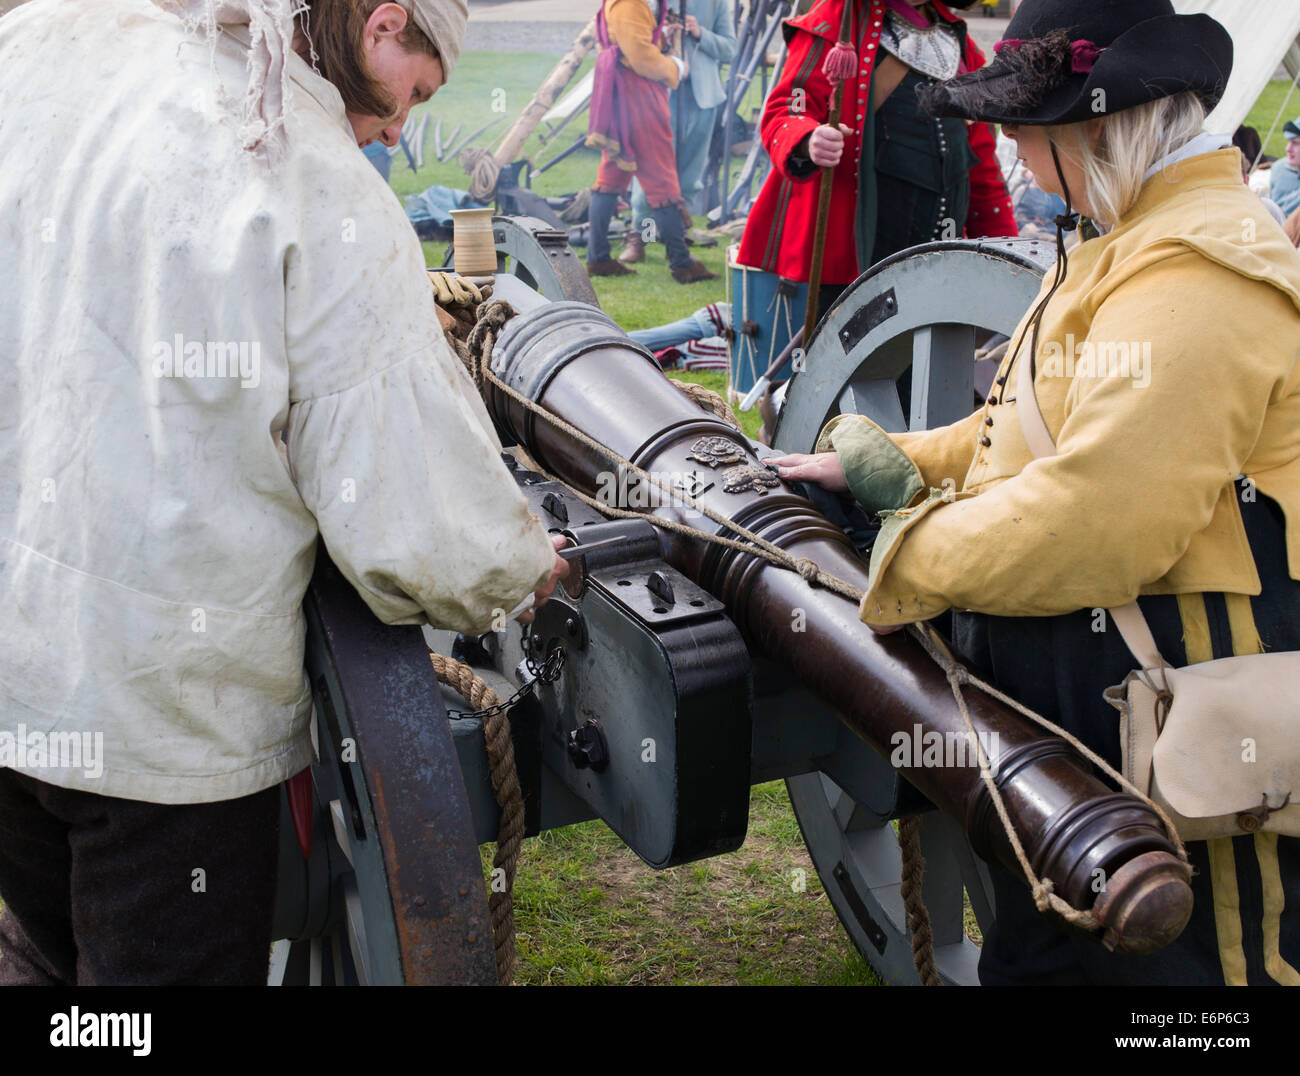 Sir William Pennymans Regiment. English Civil War. Royalist Army cleaning a canon at a Reenactment Military Show. UK Stock Photo